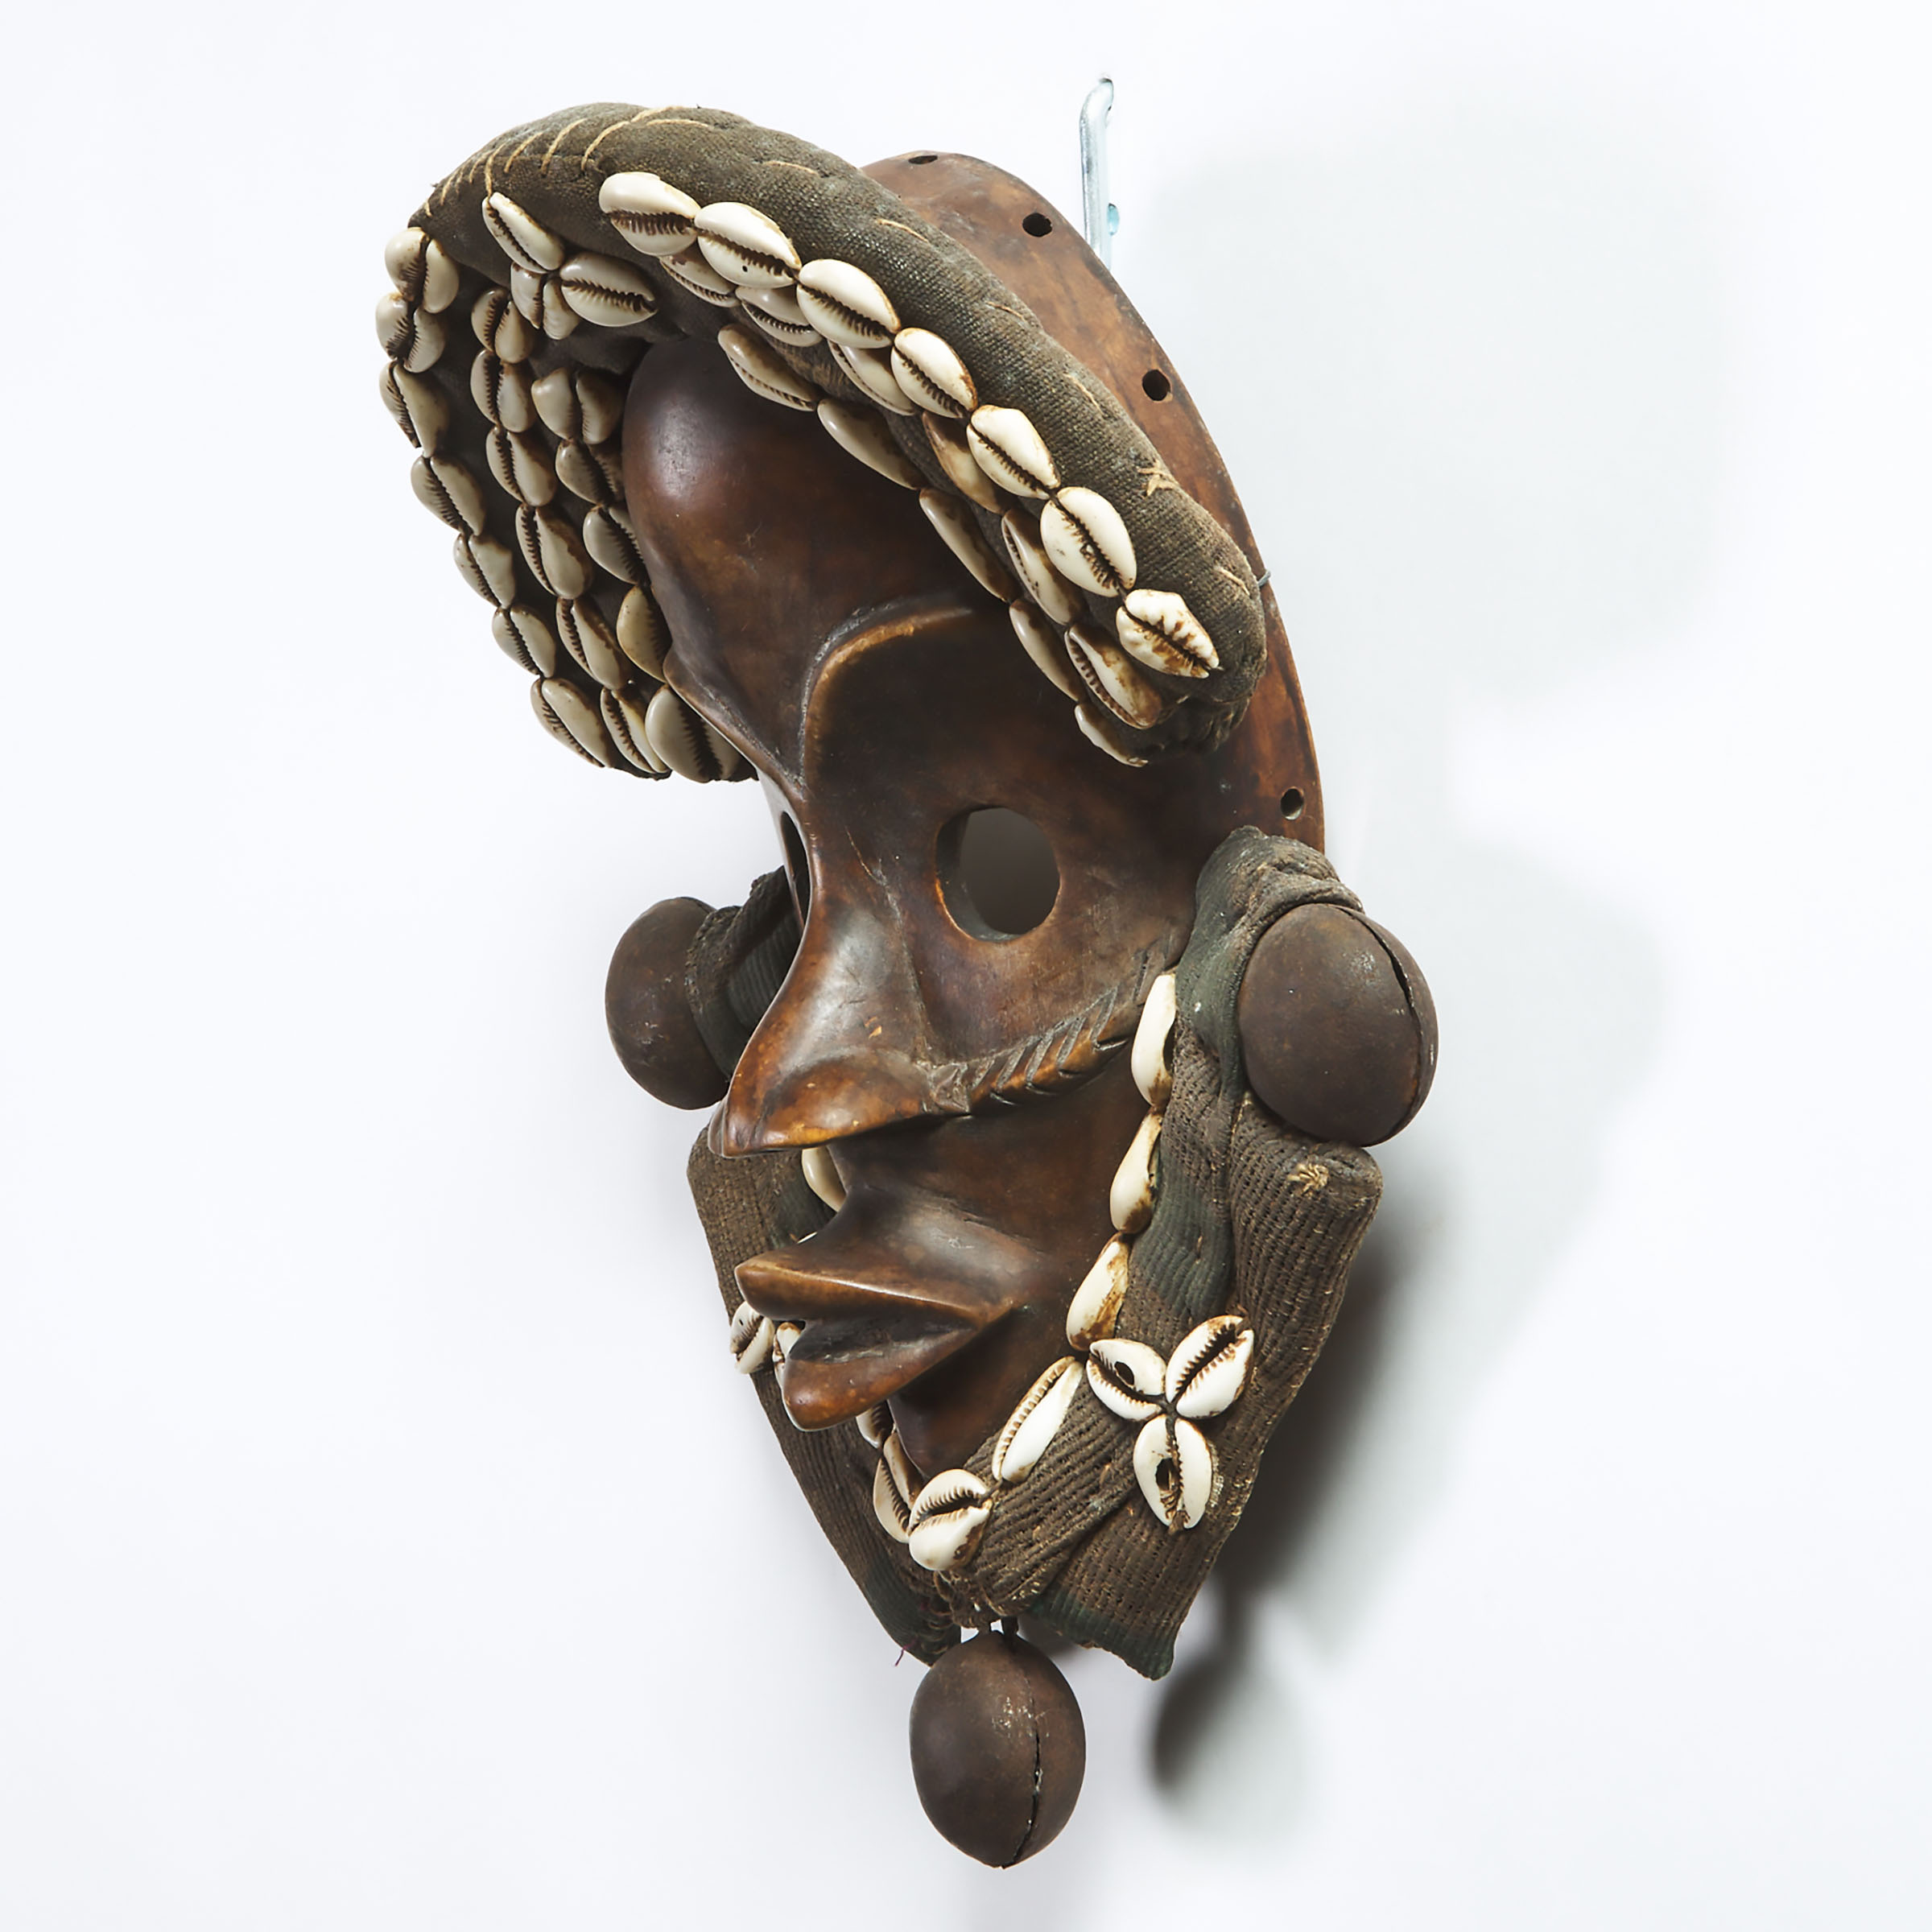 Dan Mask, Ivory Coast/Liberia, West Africa, mid to late 20th century